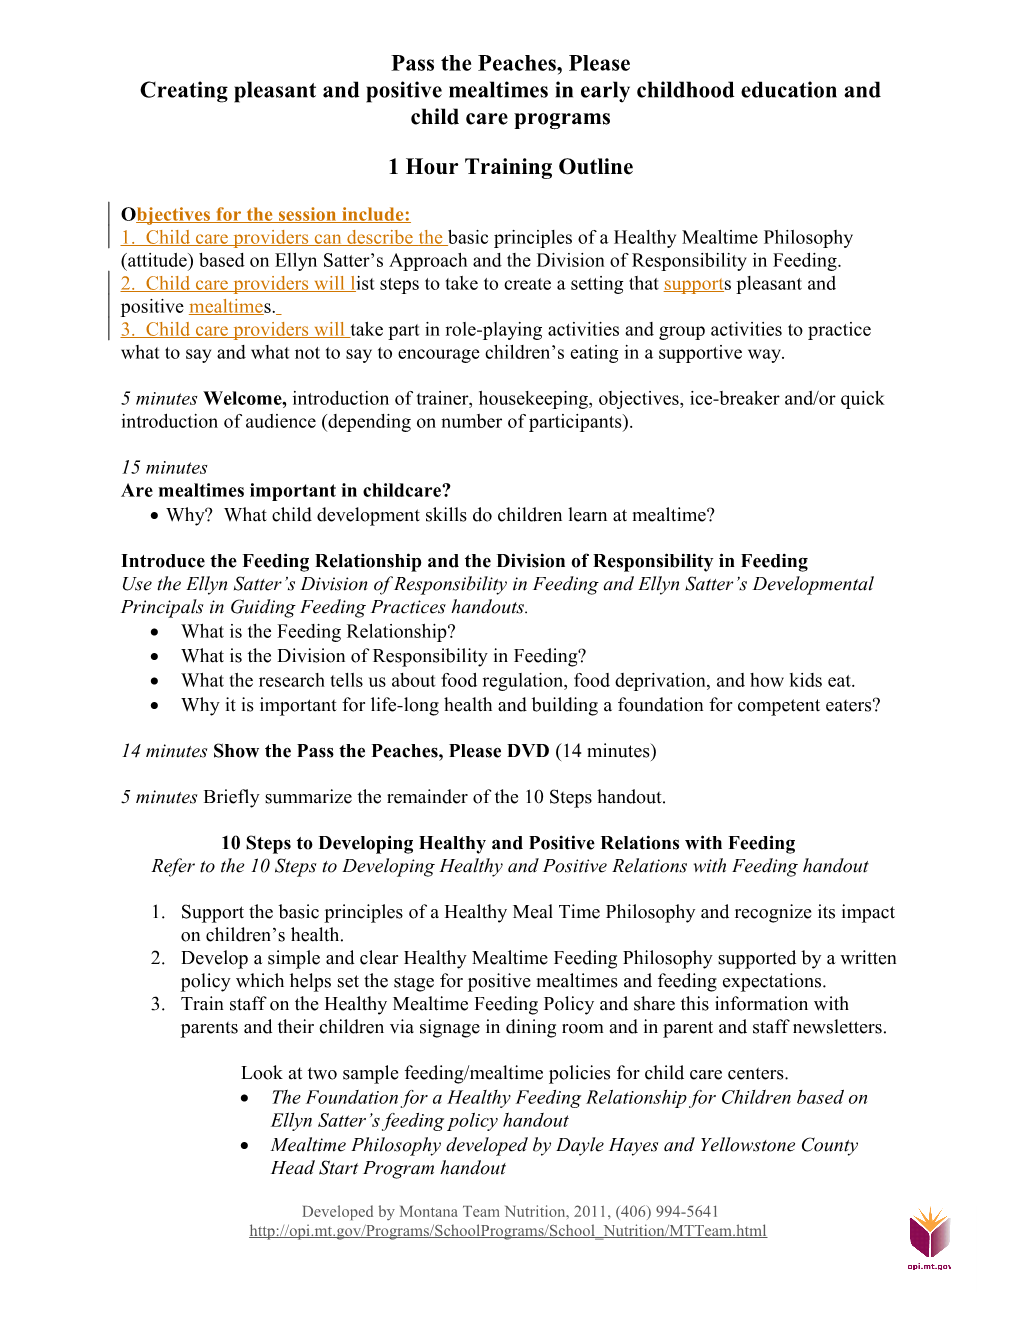 Outline for March 12 Training in Poplar